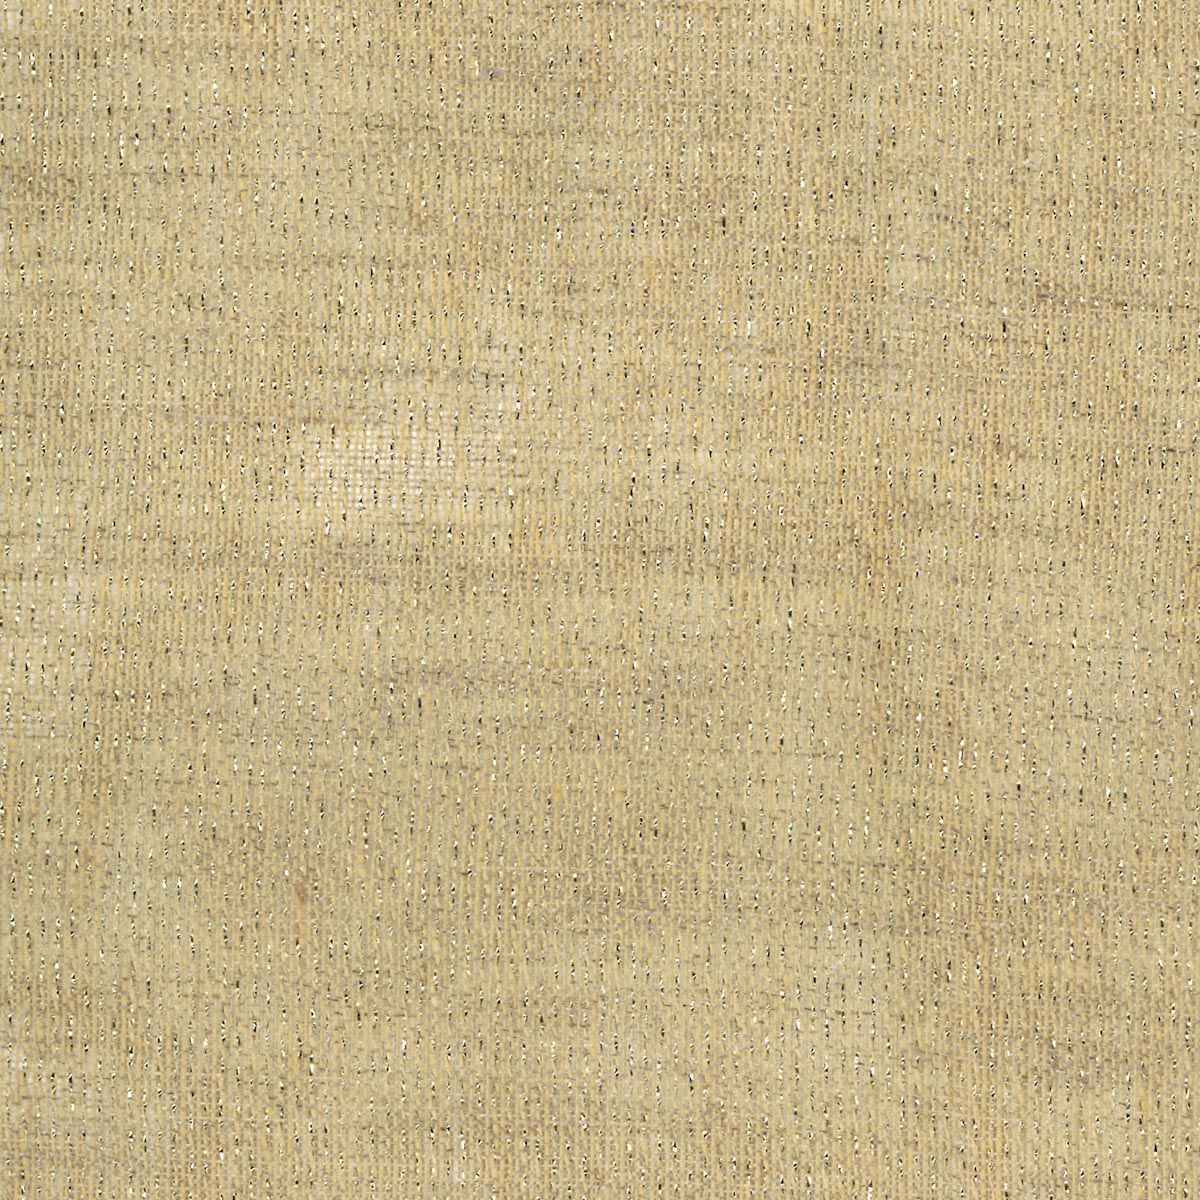 Sheer Ecstasy Gw fabric in gold color - pattern number P0 00021466 - by Scalamandre in the Old World Weavers collection